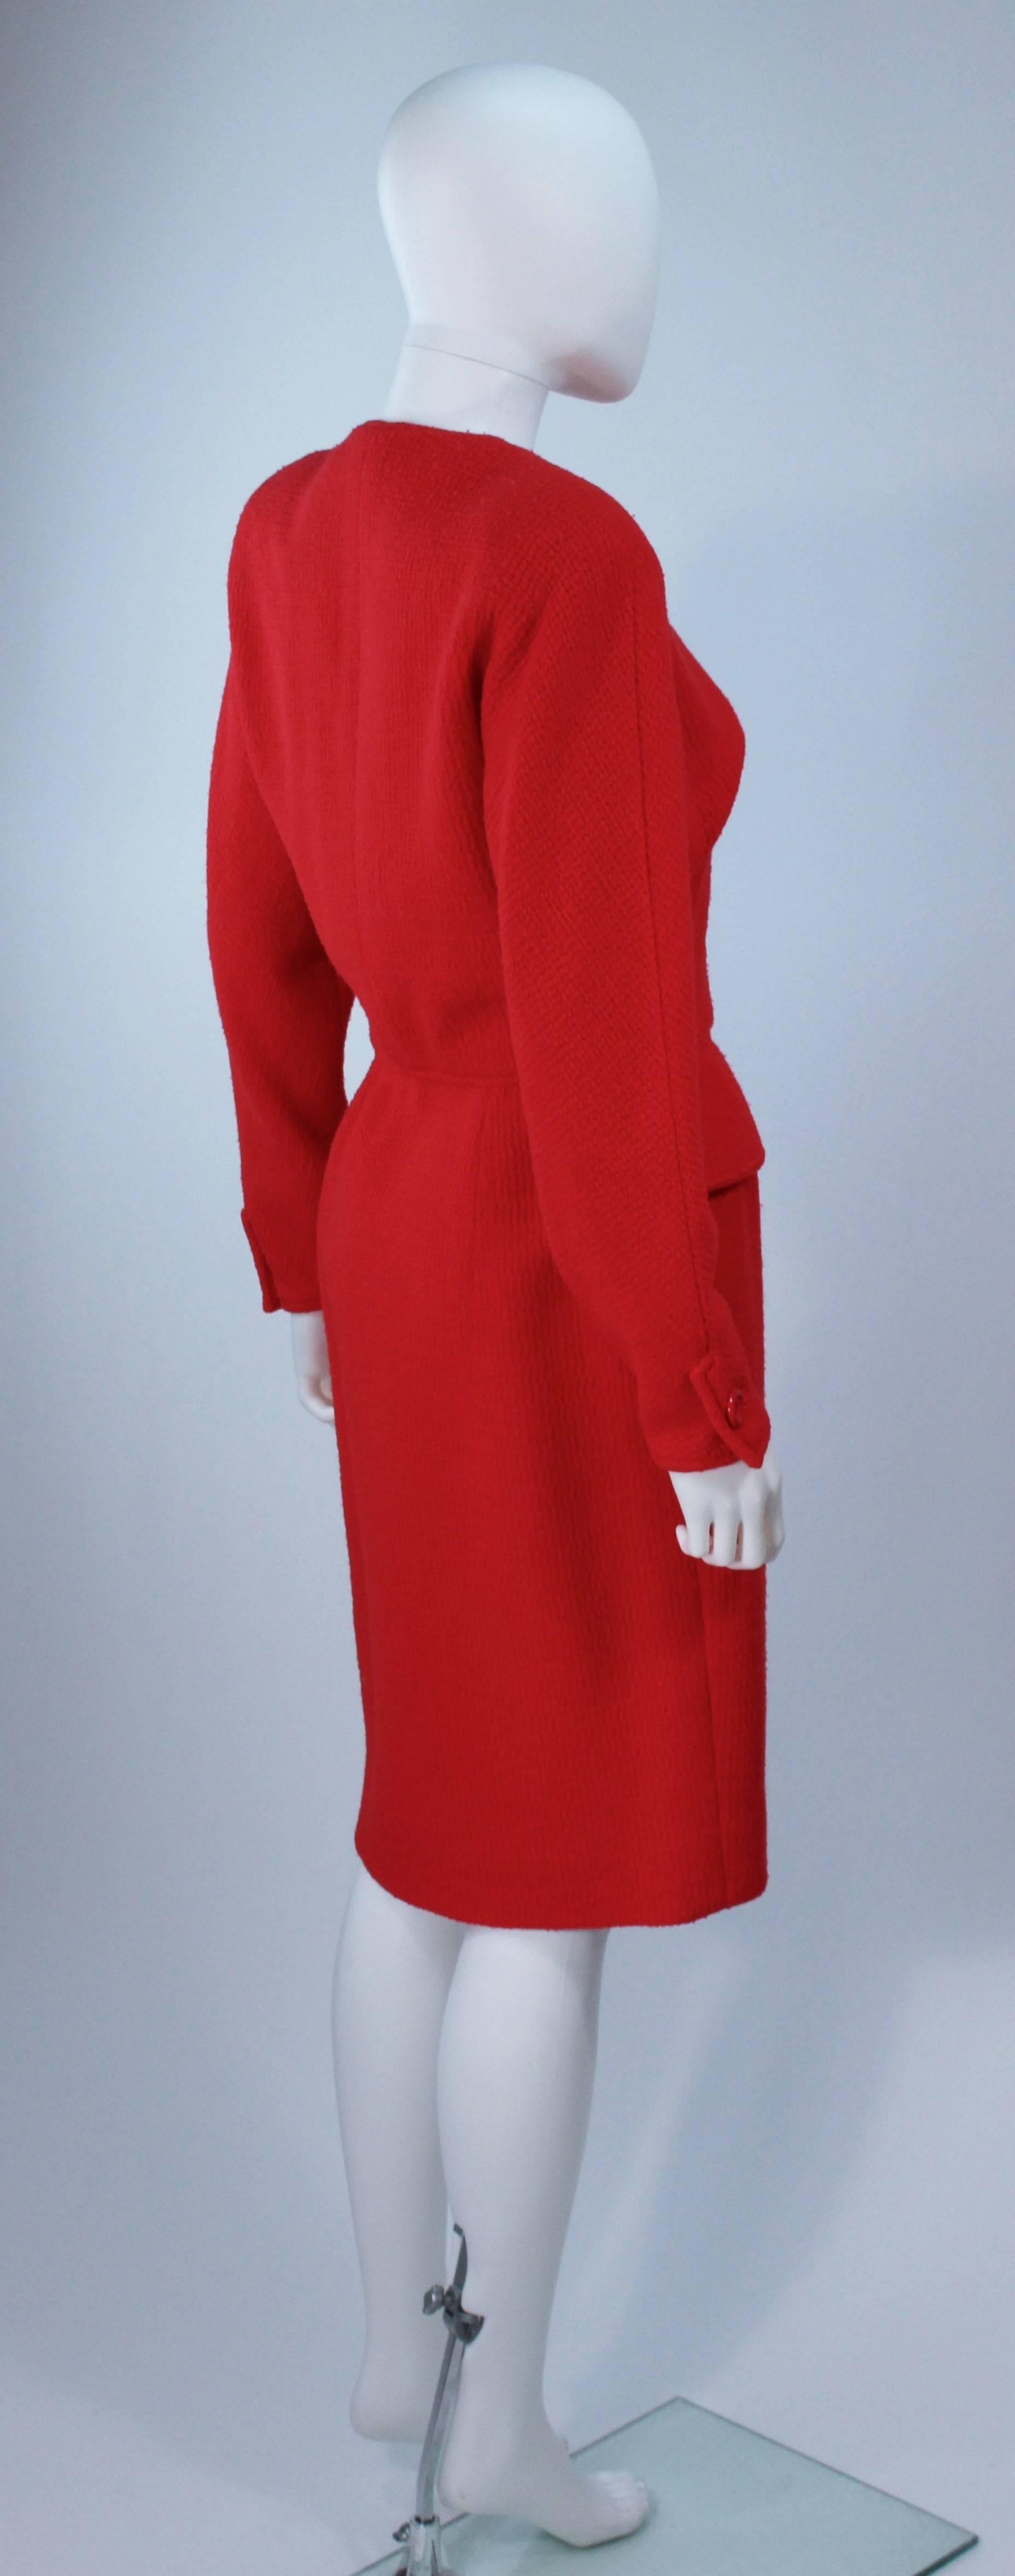 VALENTINO Red Wool Dress Size 6-8 In Excellent Condition For Sale In Los Angeles, CA